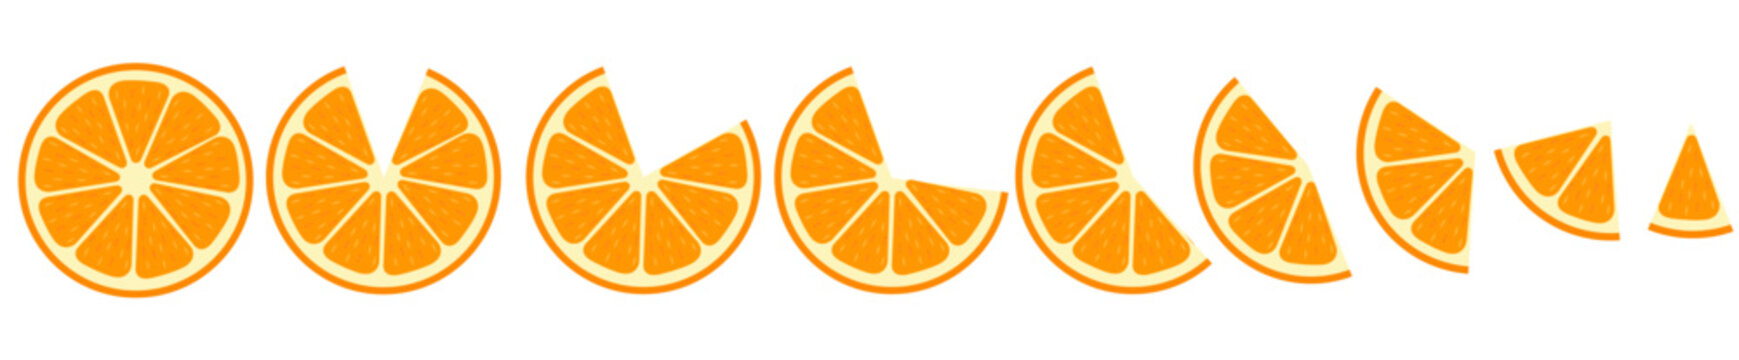 Vector image of an orange. Juicy healthy citrus fruit. A design element for web applications, websites and social networks.